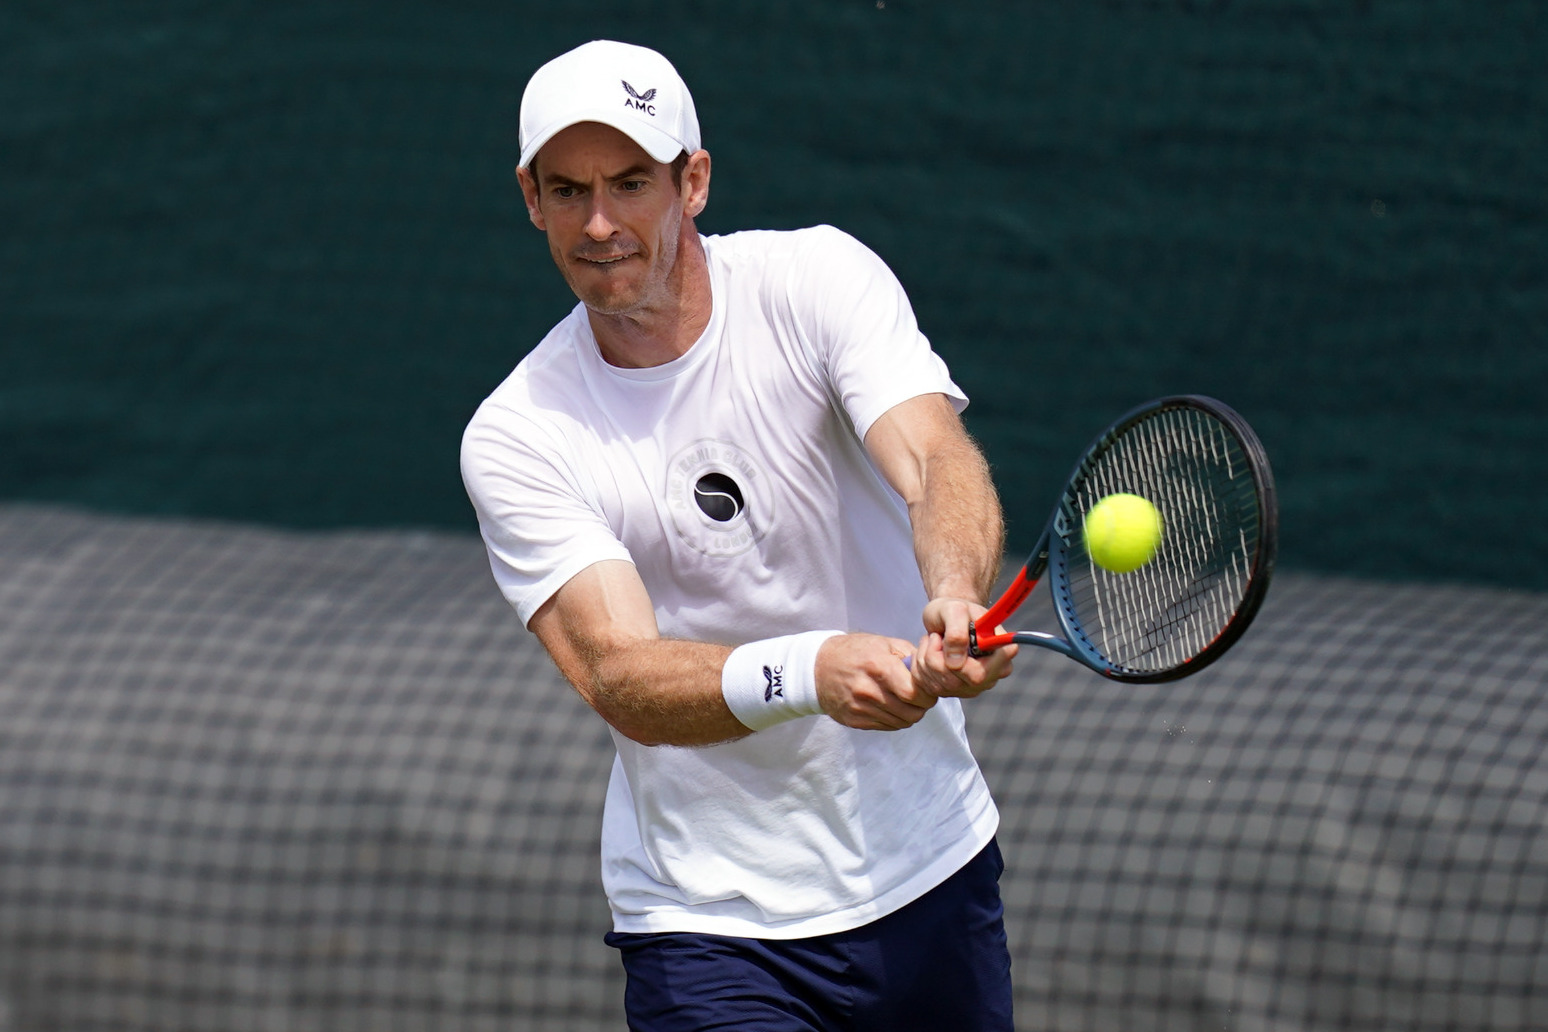 Andy Murray is through to the second round of the US Open 